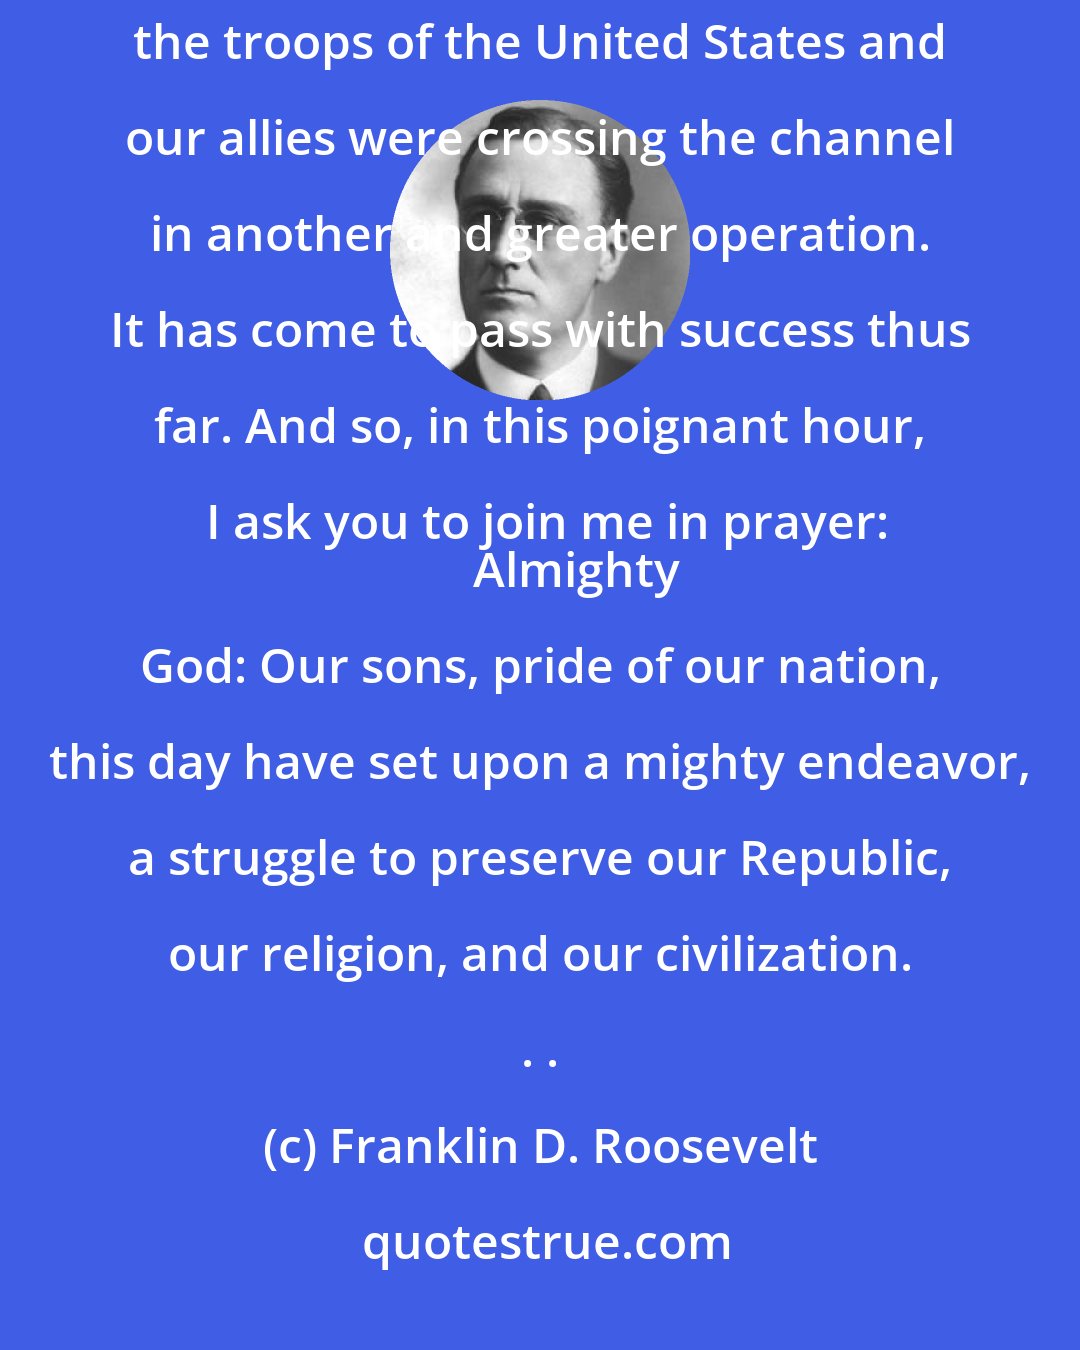 Franklin D. Roosevelt: My fellow Americans: Last night when I spoke with you about the fall of Rome, I knew at that moment that the troops of the United States and our allies were crossing the channel in another and greater operation. It has come to pass with success thus far. And so, in this poignant hour, I ask you to join me in prayer:
       Almighty God: Our sons, pride of our nation, this day have set upon a mighty endeavor, a struggle to preserve our Republic, our religion, and our civilization. . .